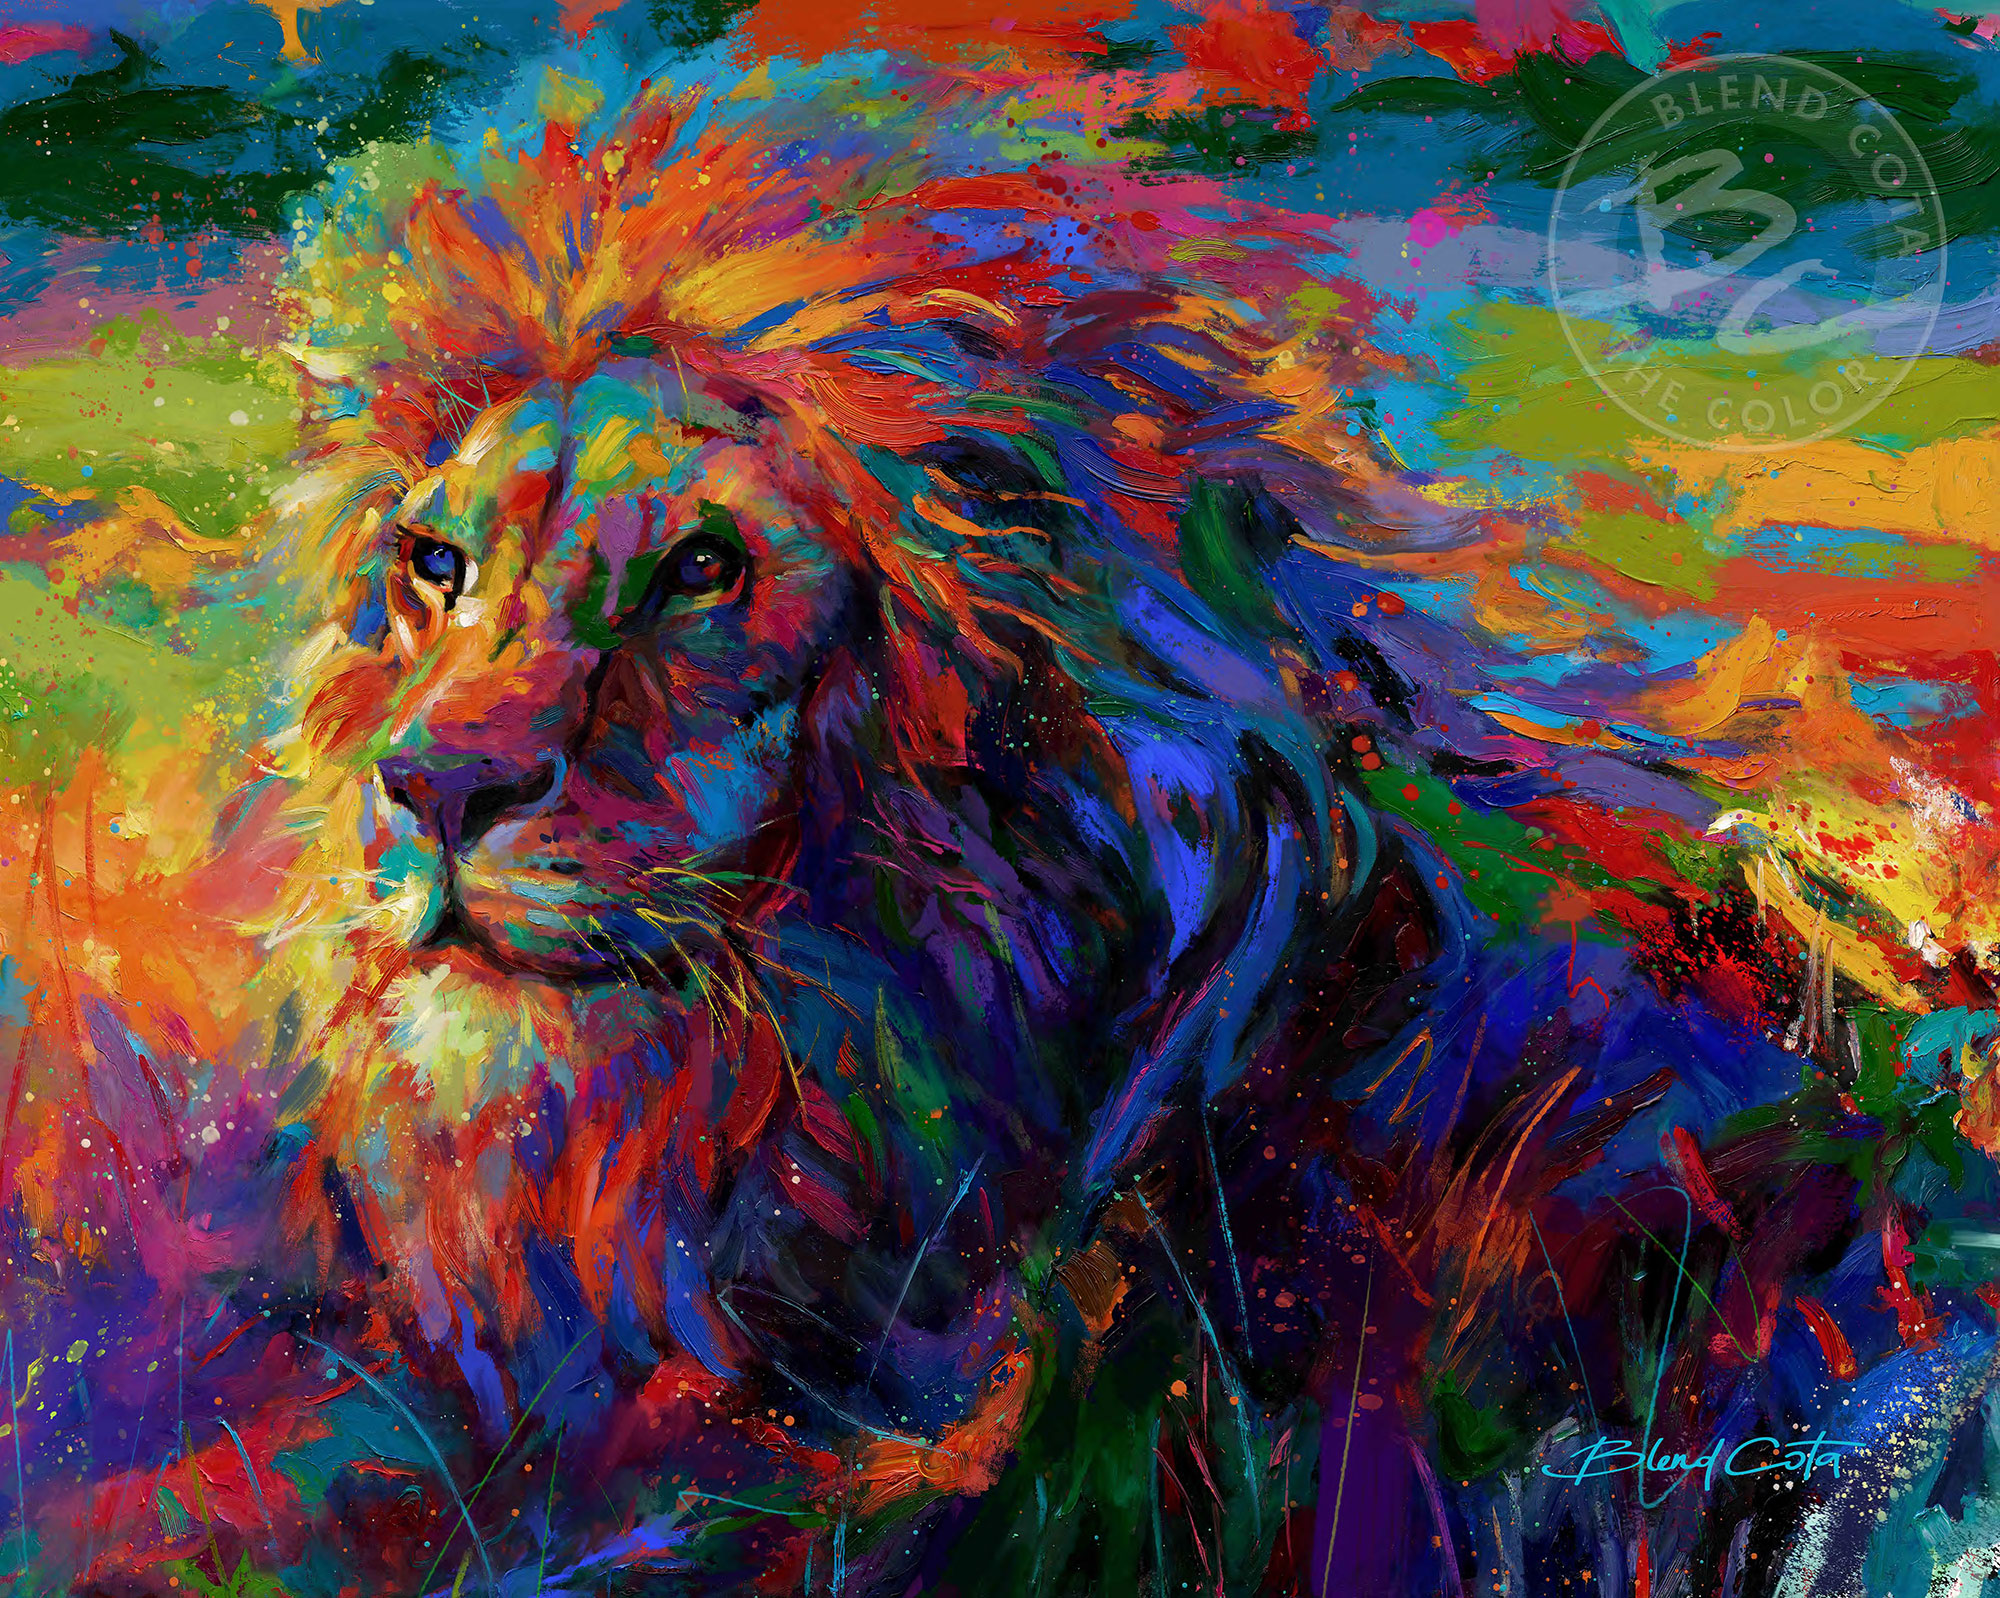 King Of The Jungle by Blend Cota